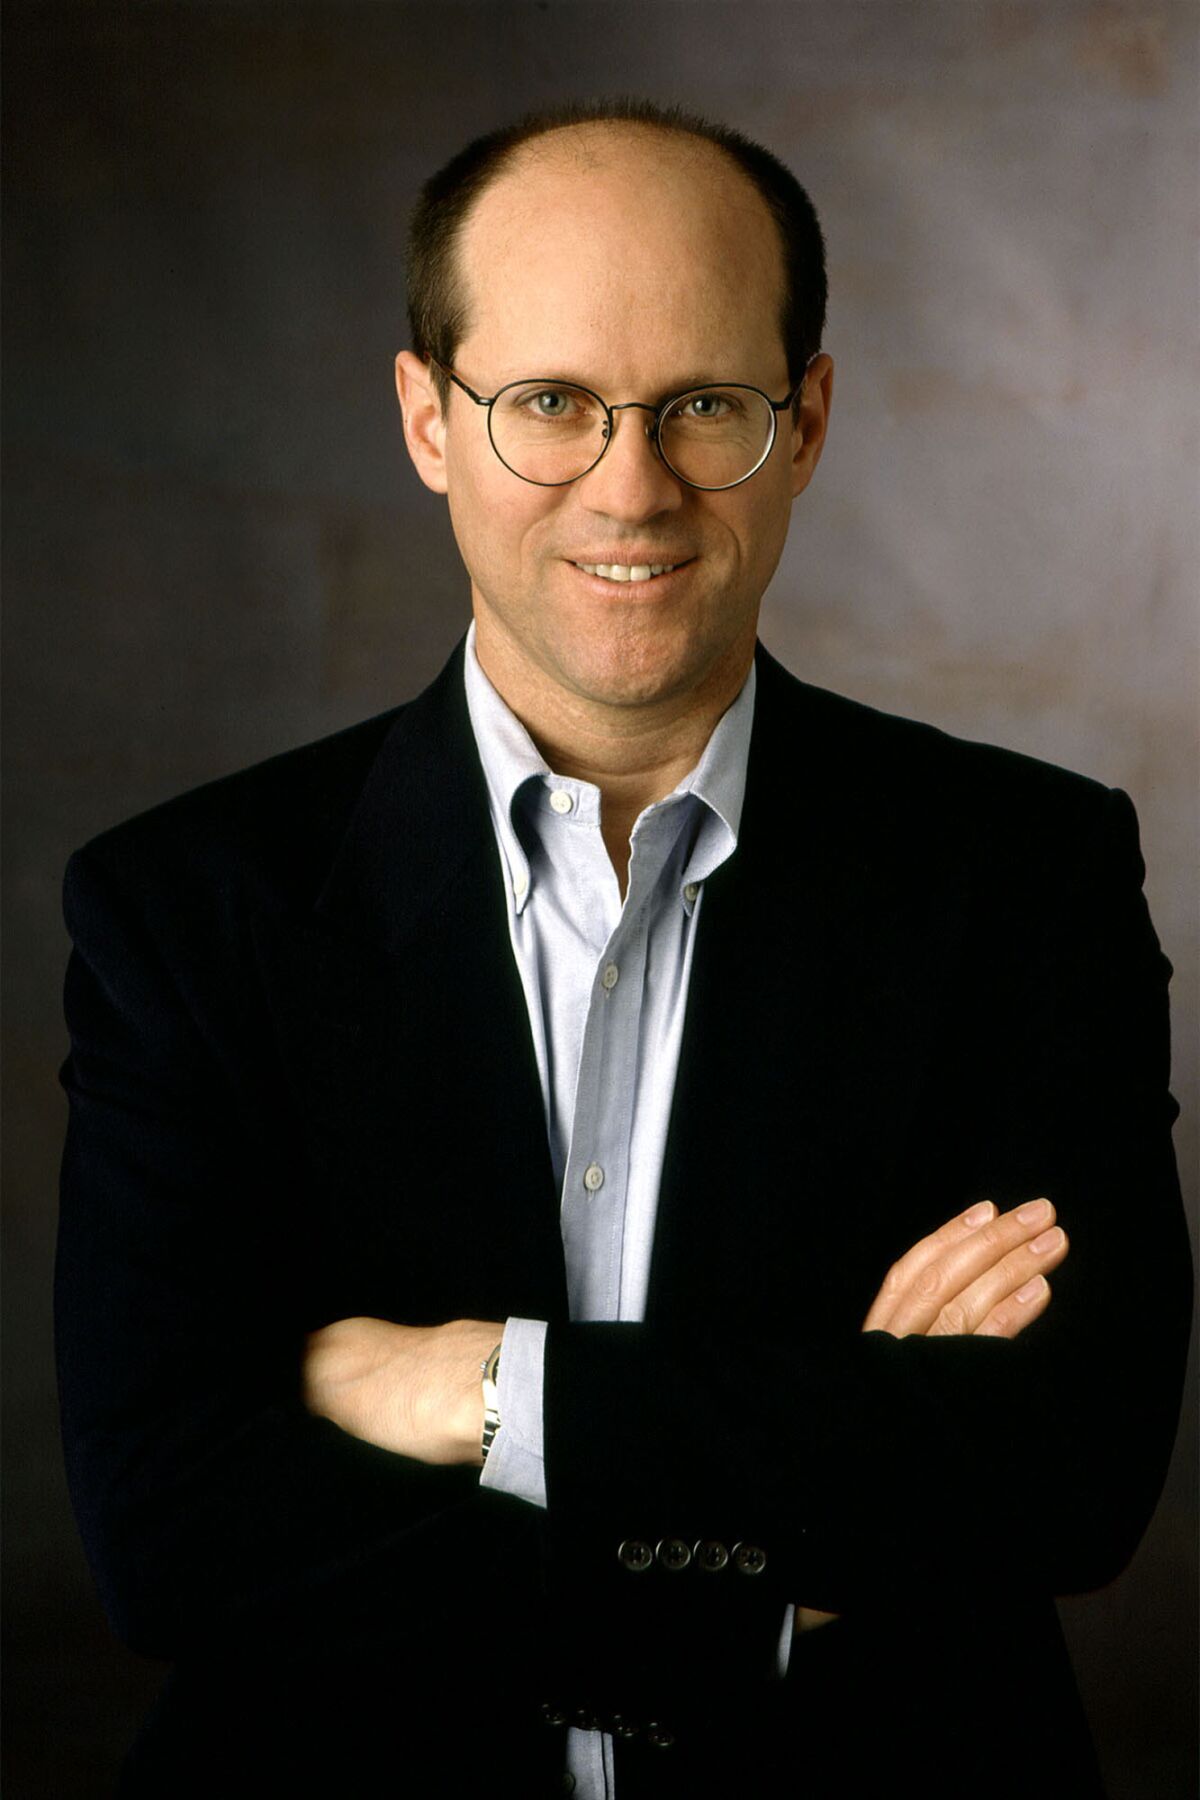 Steve Kirsch, Silicon Valley philanthropist and founder of the COVID Early Treatment Fund